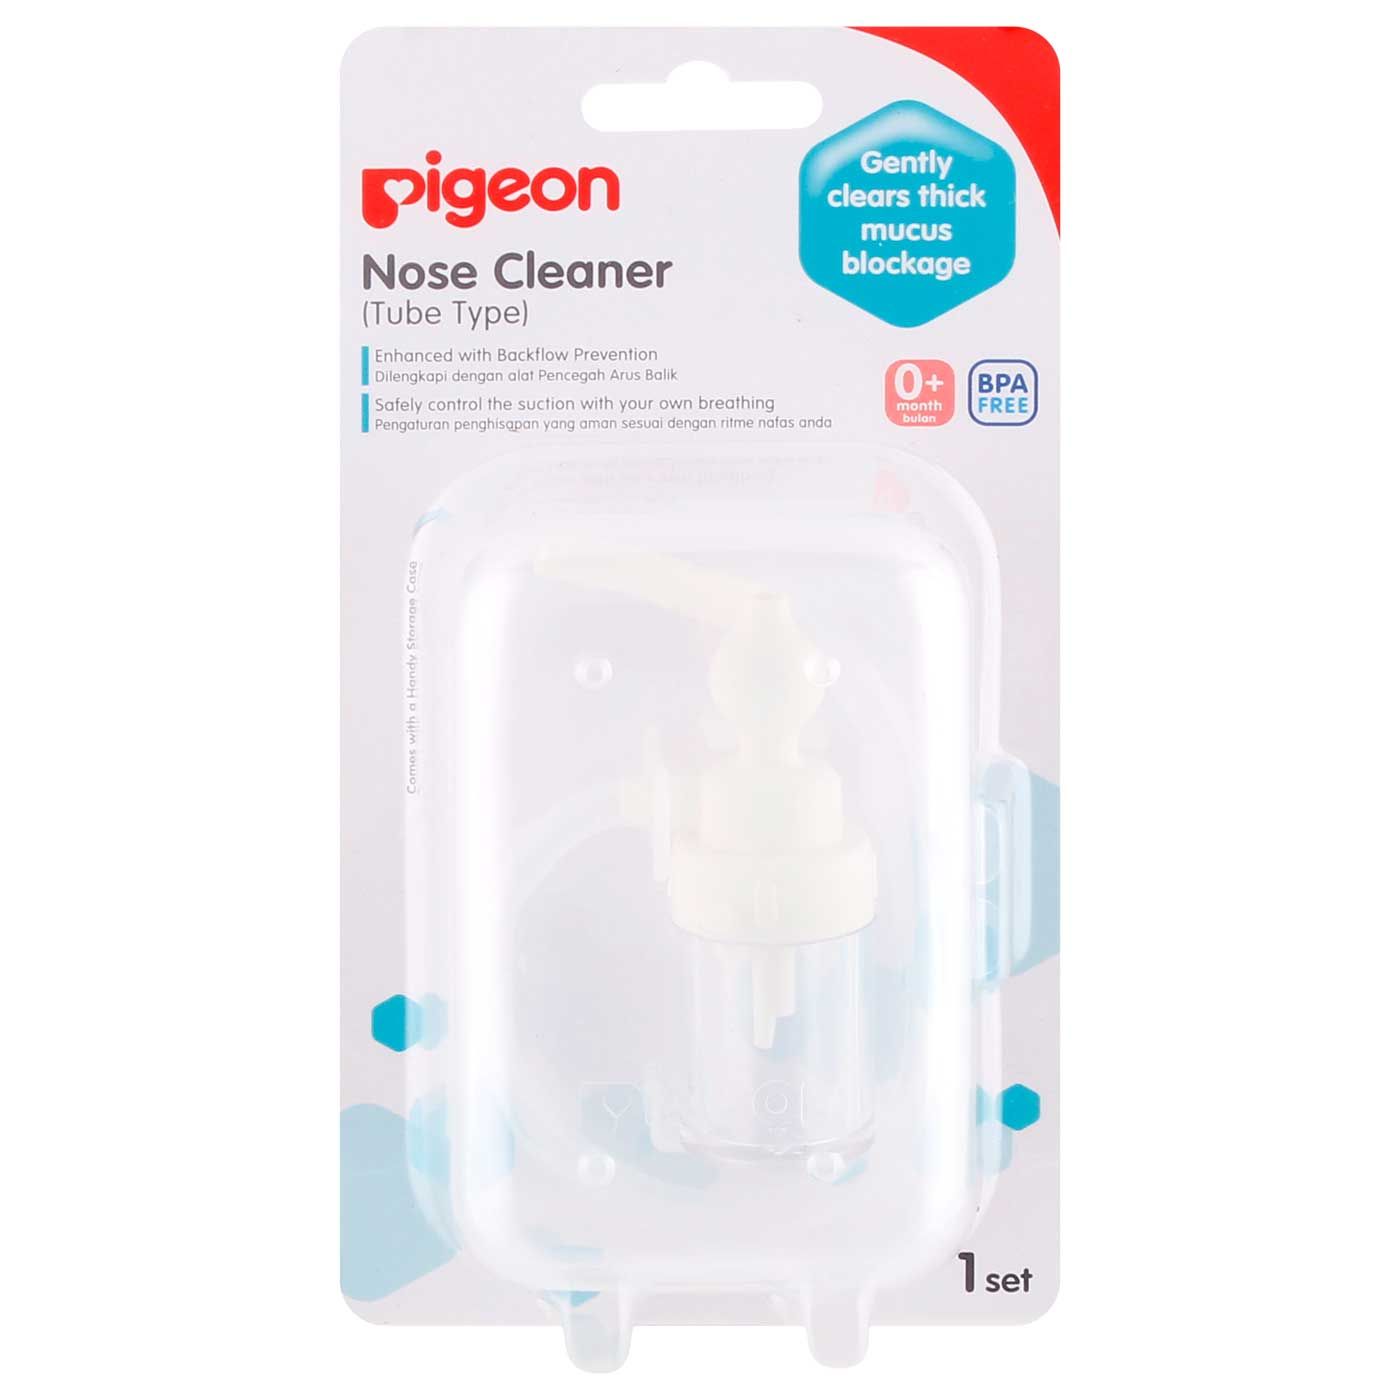 Pigeon Nose Cleaner Tube Type - 1